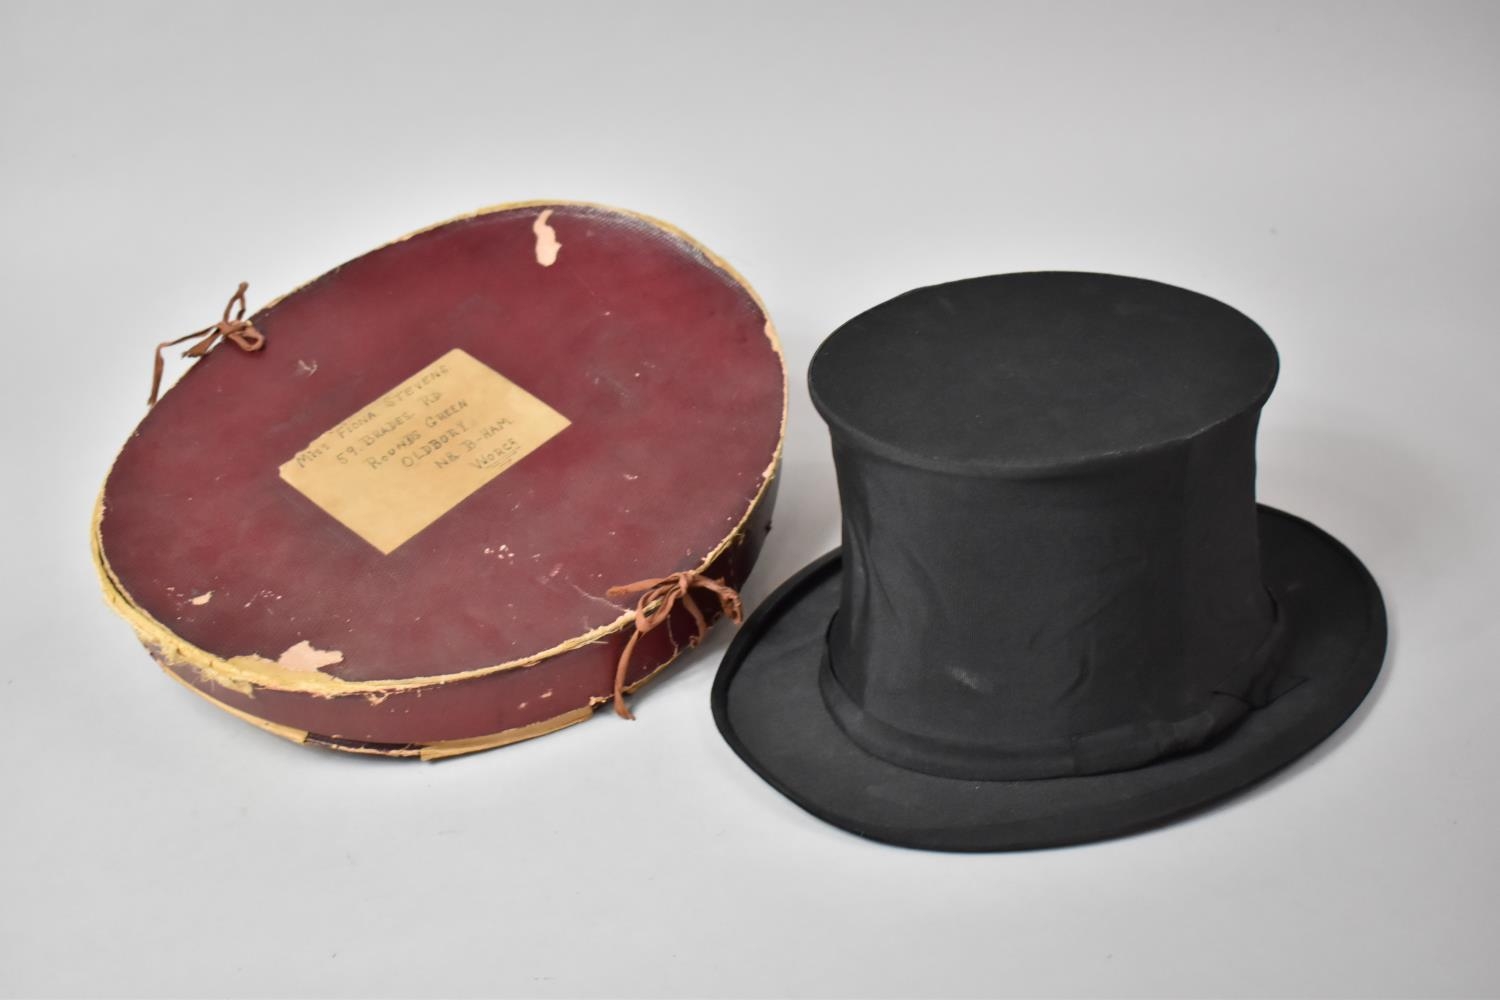 A Vintage Collapsible Opera Top Hat by Henry Heath with Addressed Oval Cardboard Container